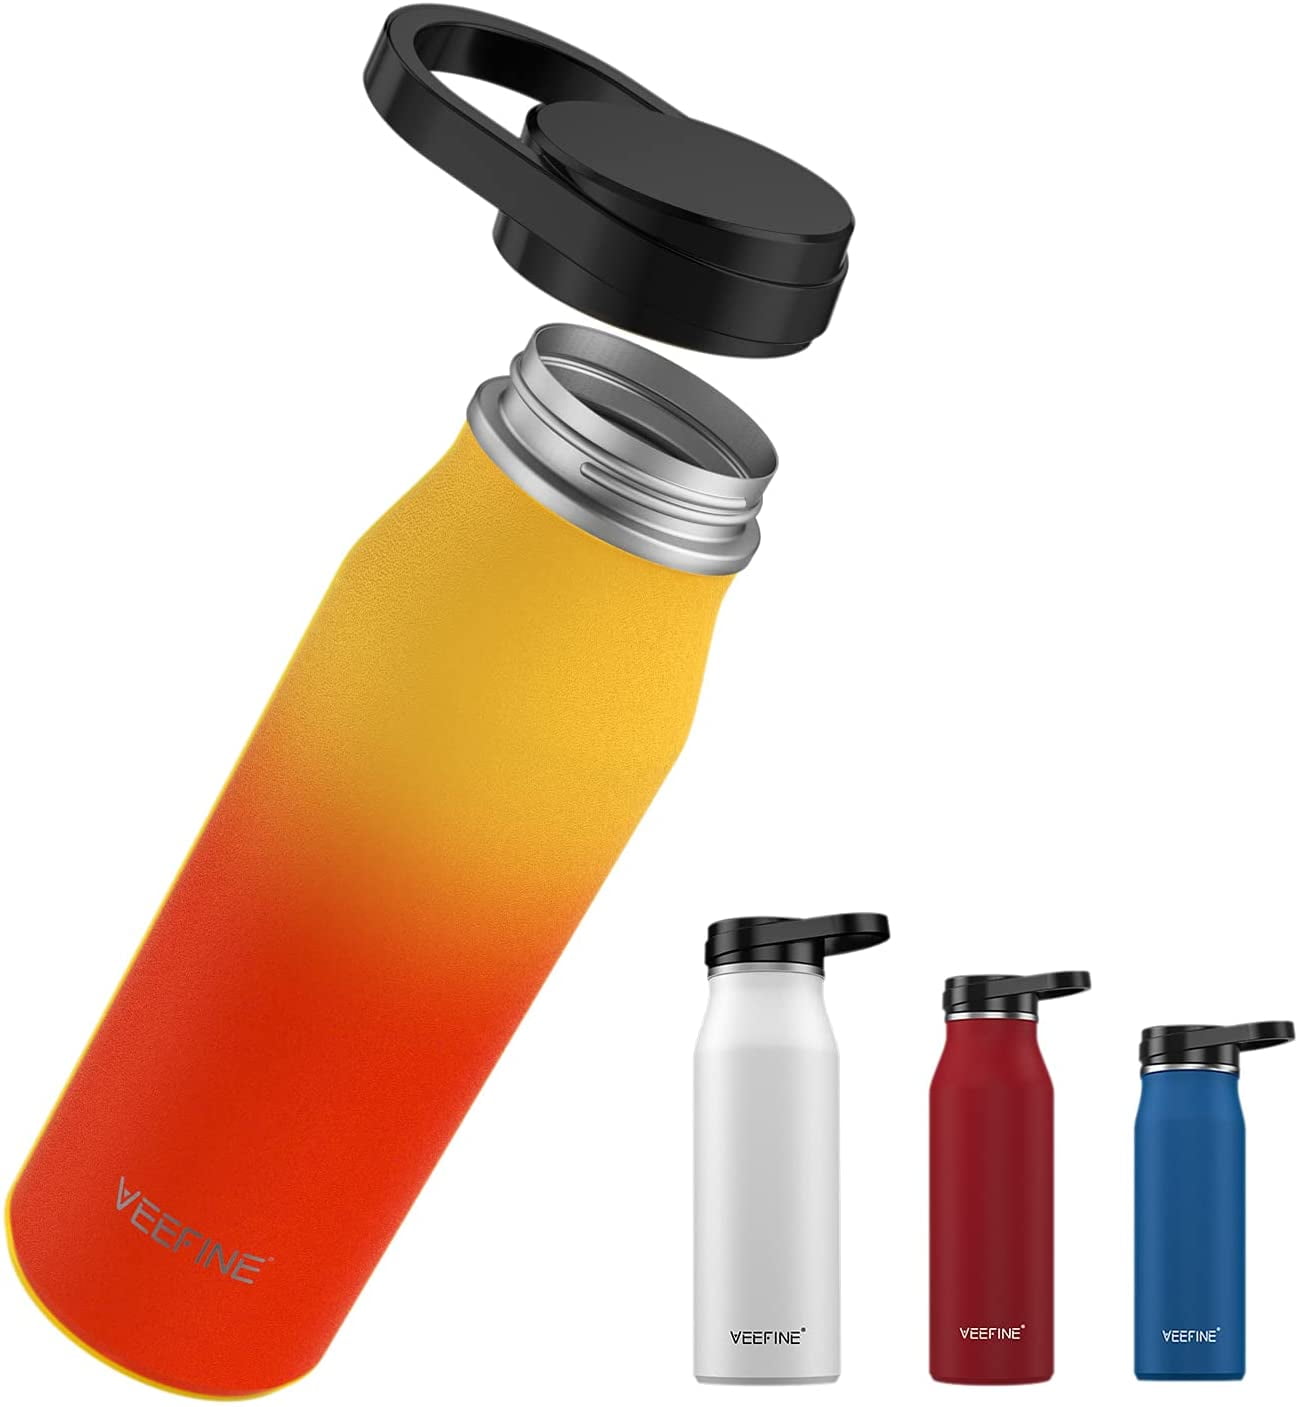 VeeFine Insulated Water Bottle Stainless Steel Water Bottles BPA-Free Dishwasher Safe 20/32/40oz Wide Mouth Lid Eco-Friendly Thermos for Hiking Camping and Travel